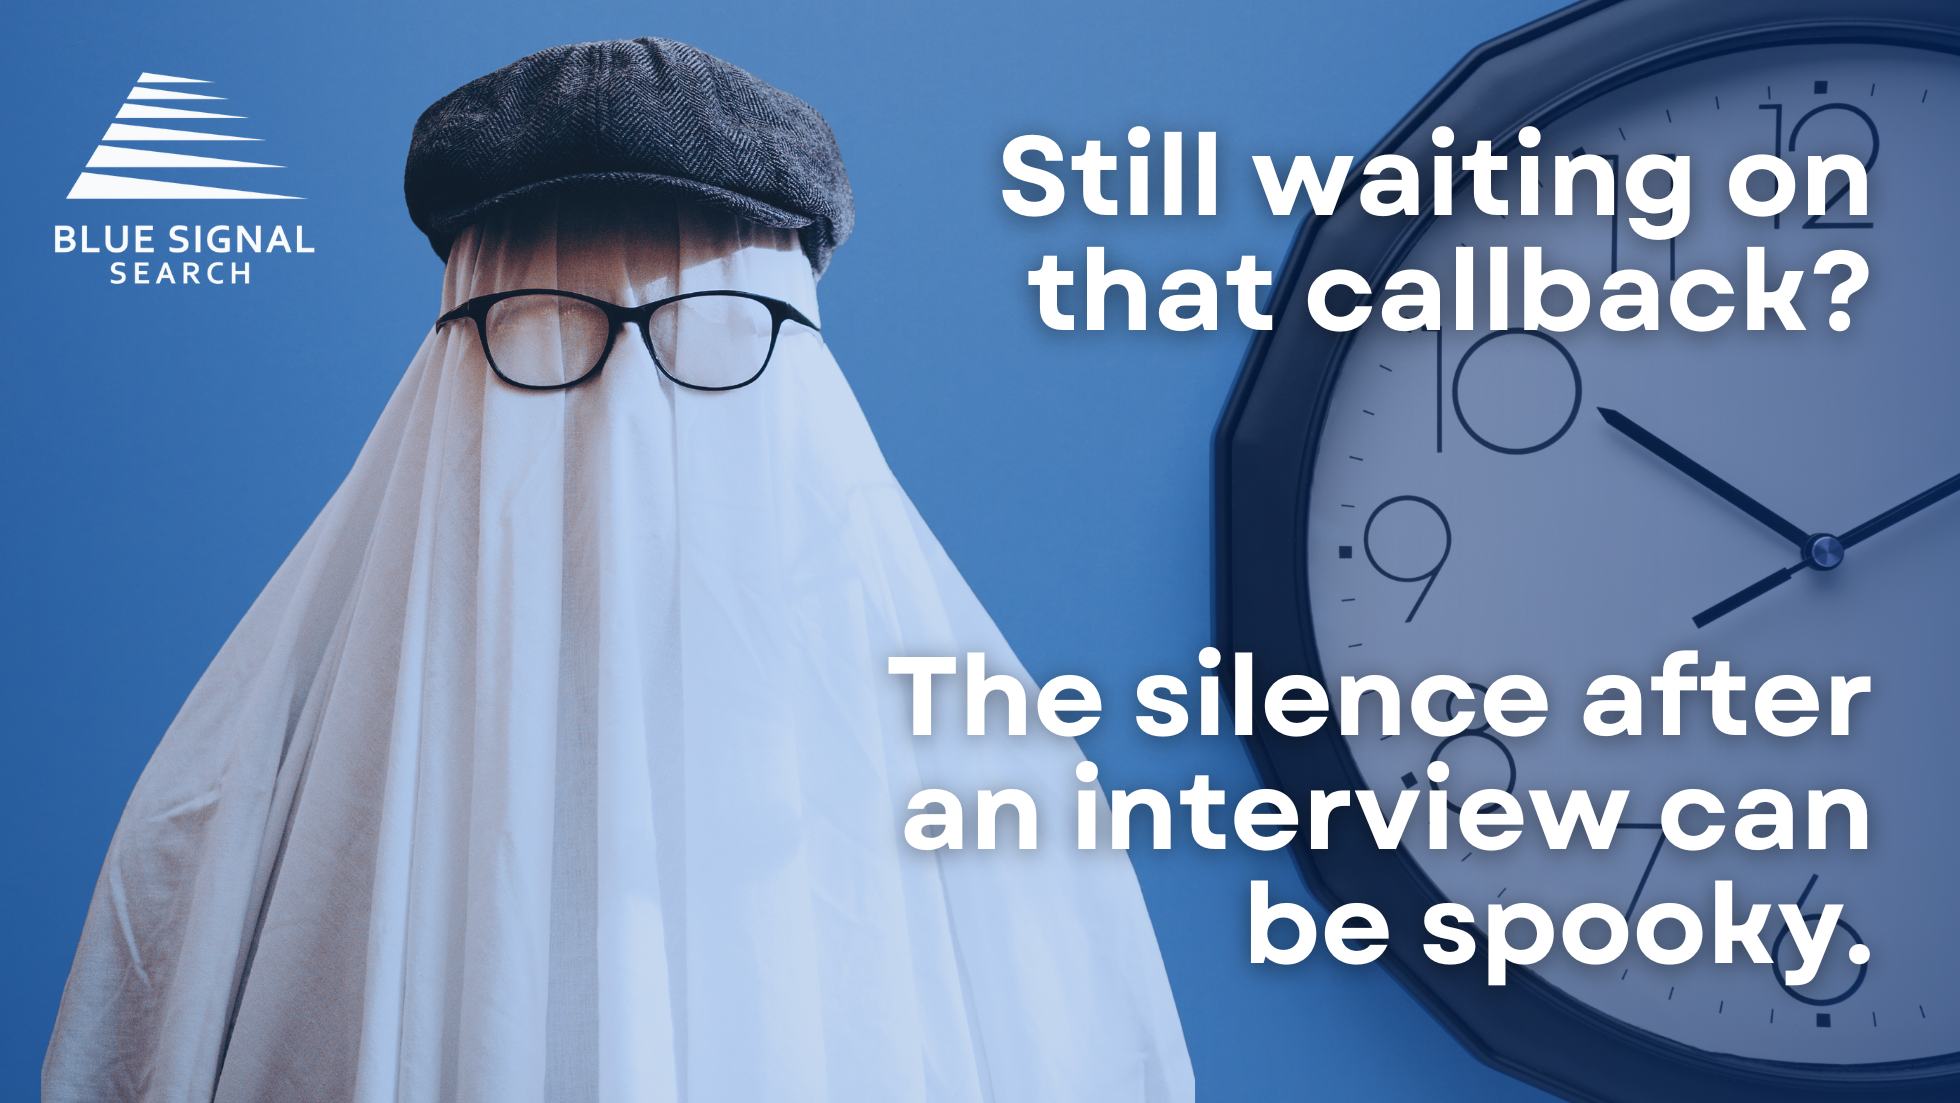 A ghostly figure with glasses and a cap, humorously representing the anxious wait for a job interview callback, with a clock in the background.